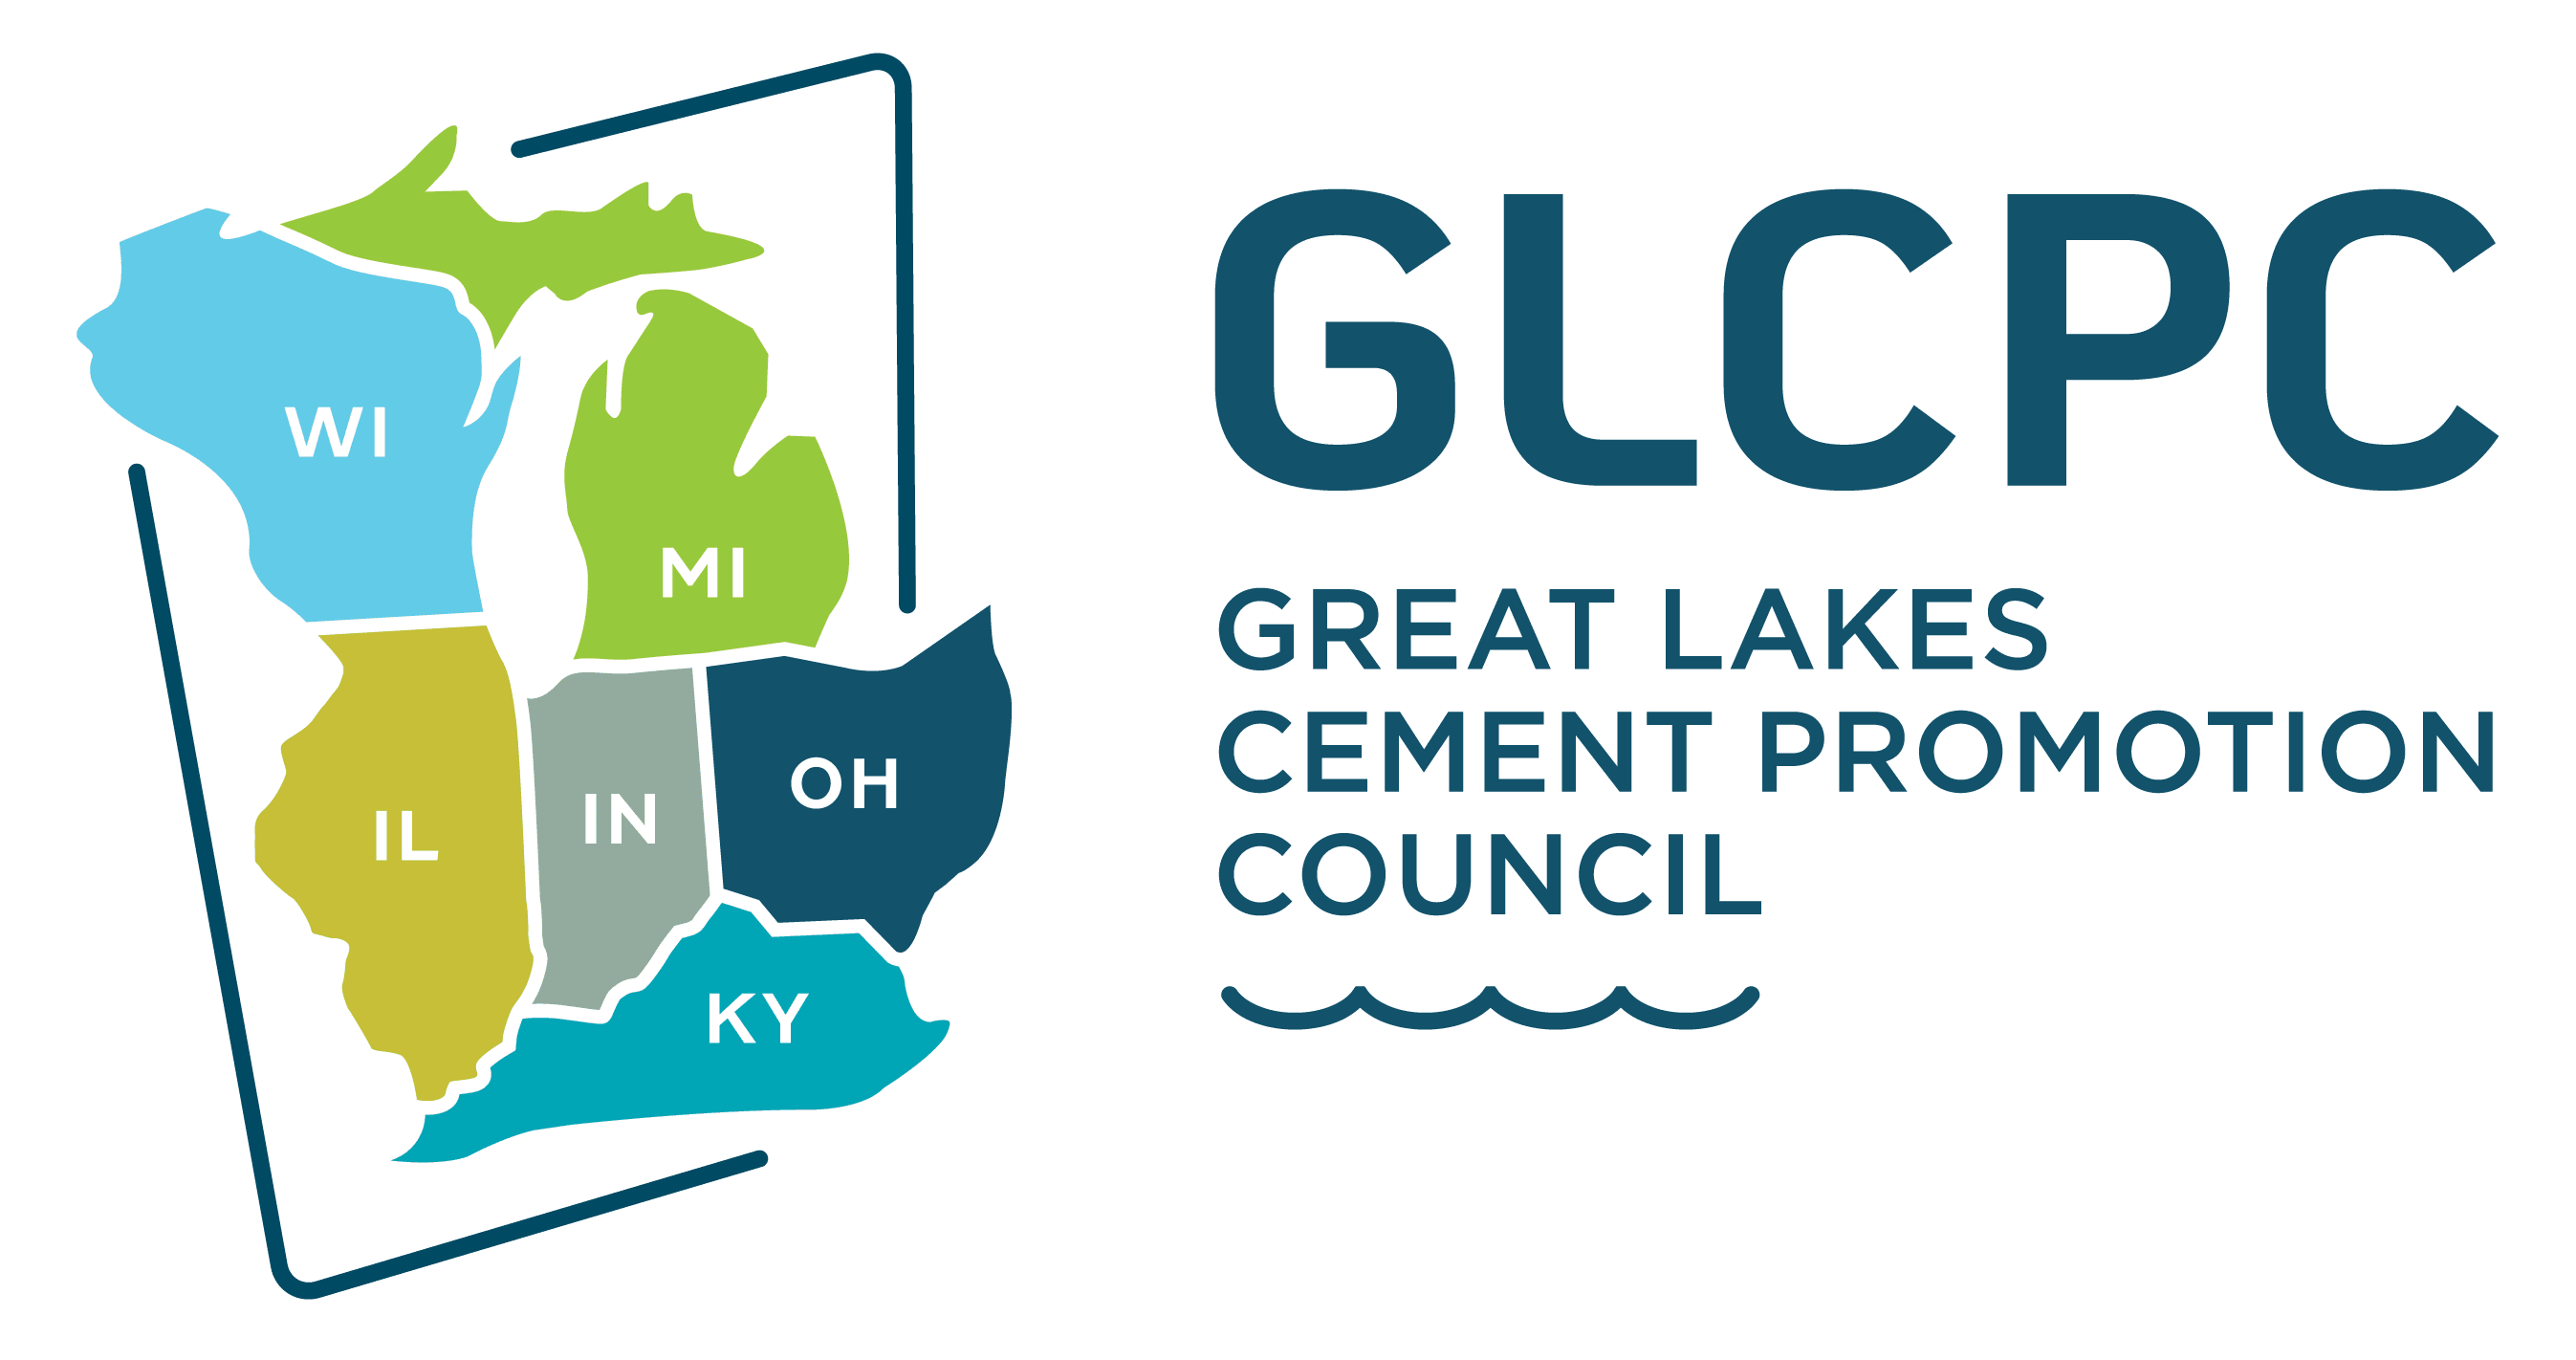 Great Lakes Cement Promotion Council